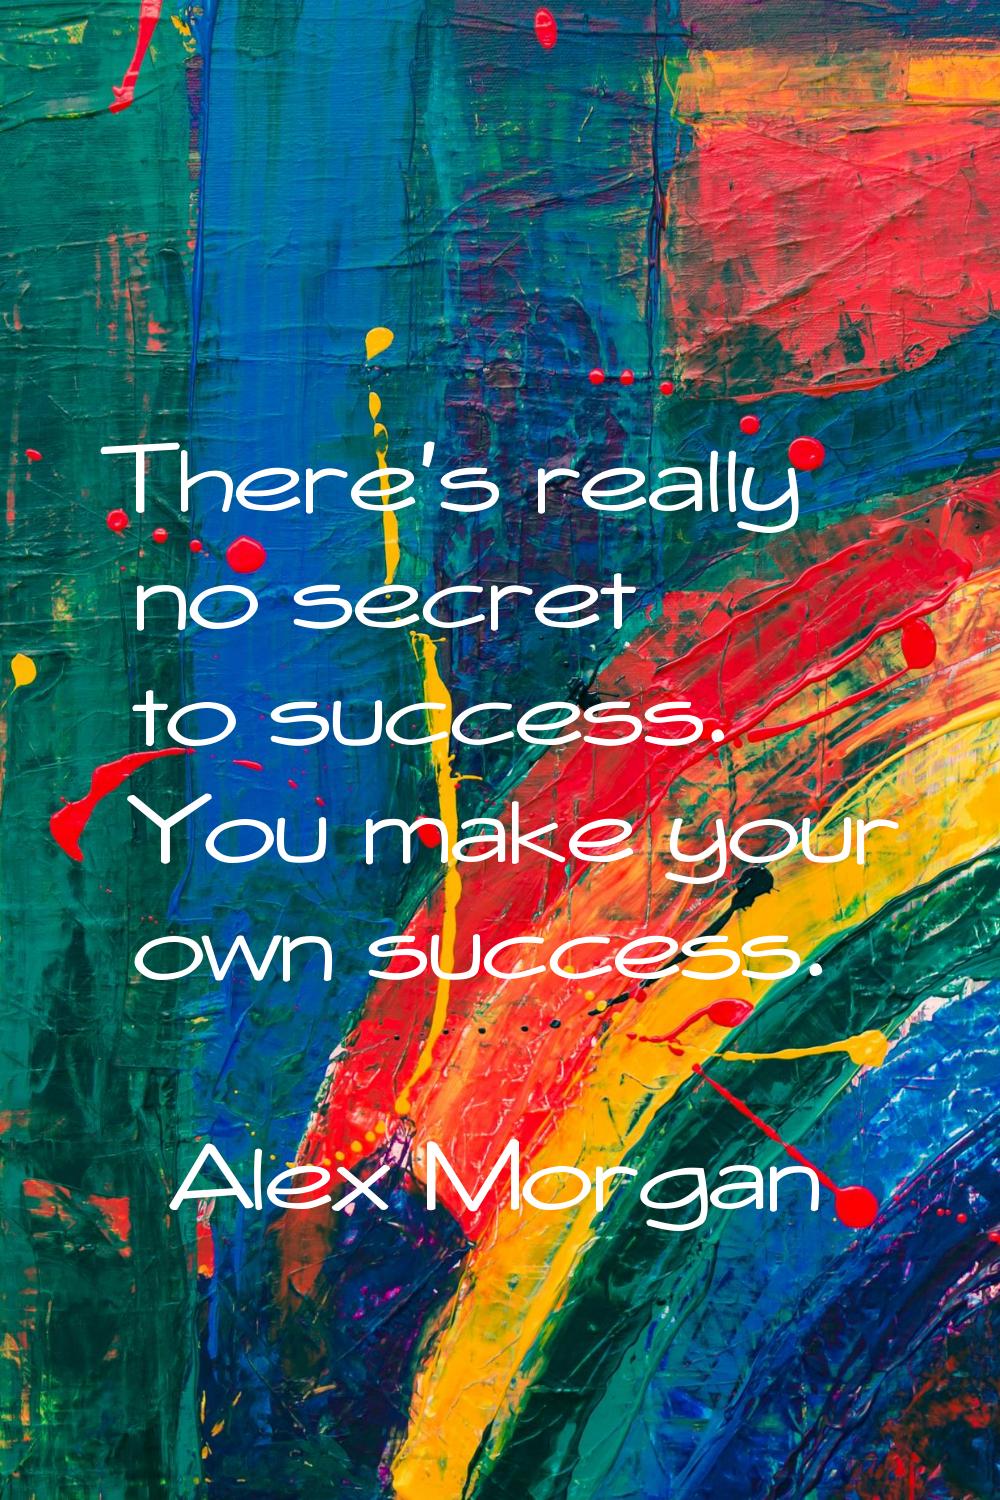 There's really no secret to success. You make your own success.